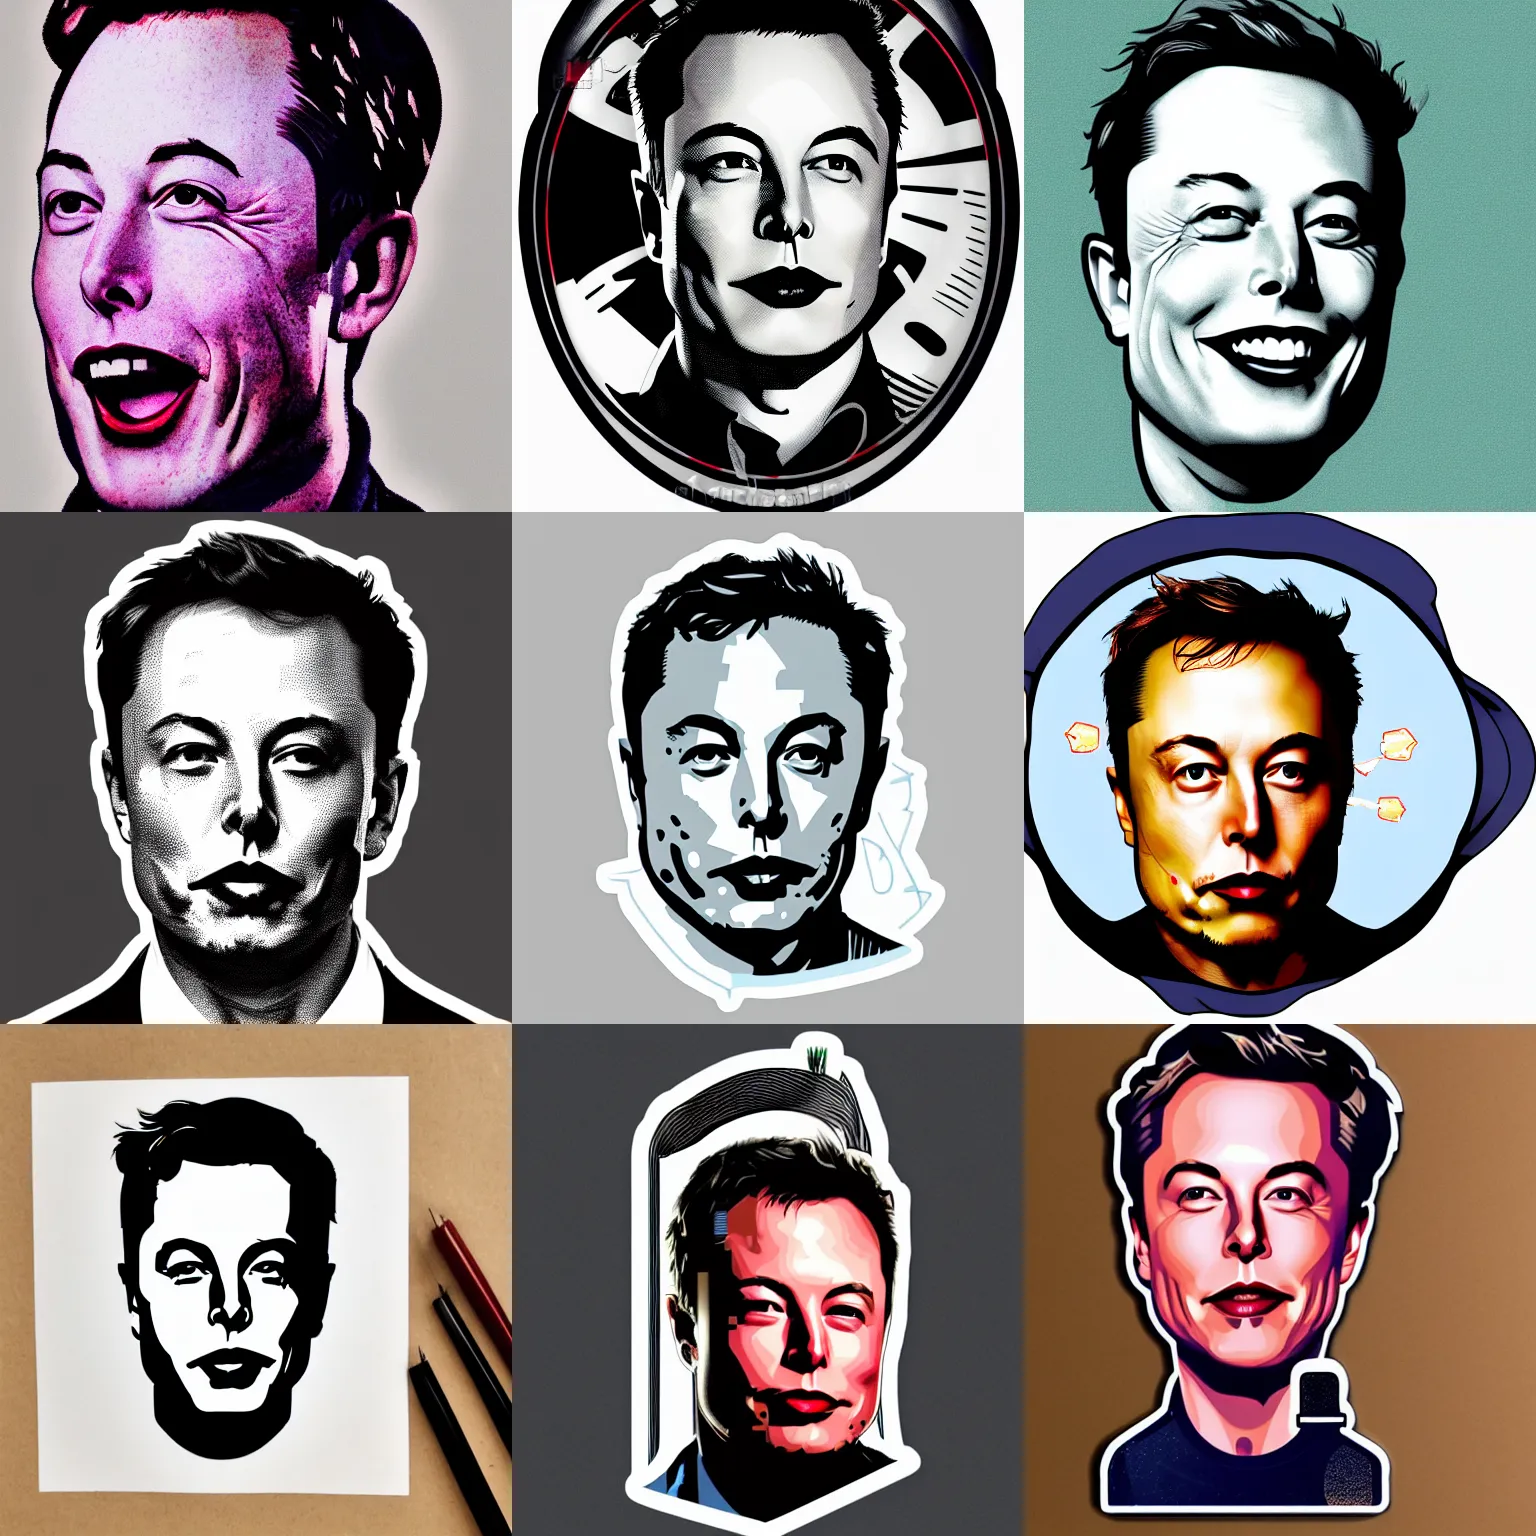 Paintings, Elon Musk, Page 122, Modern and Contemporary Art